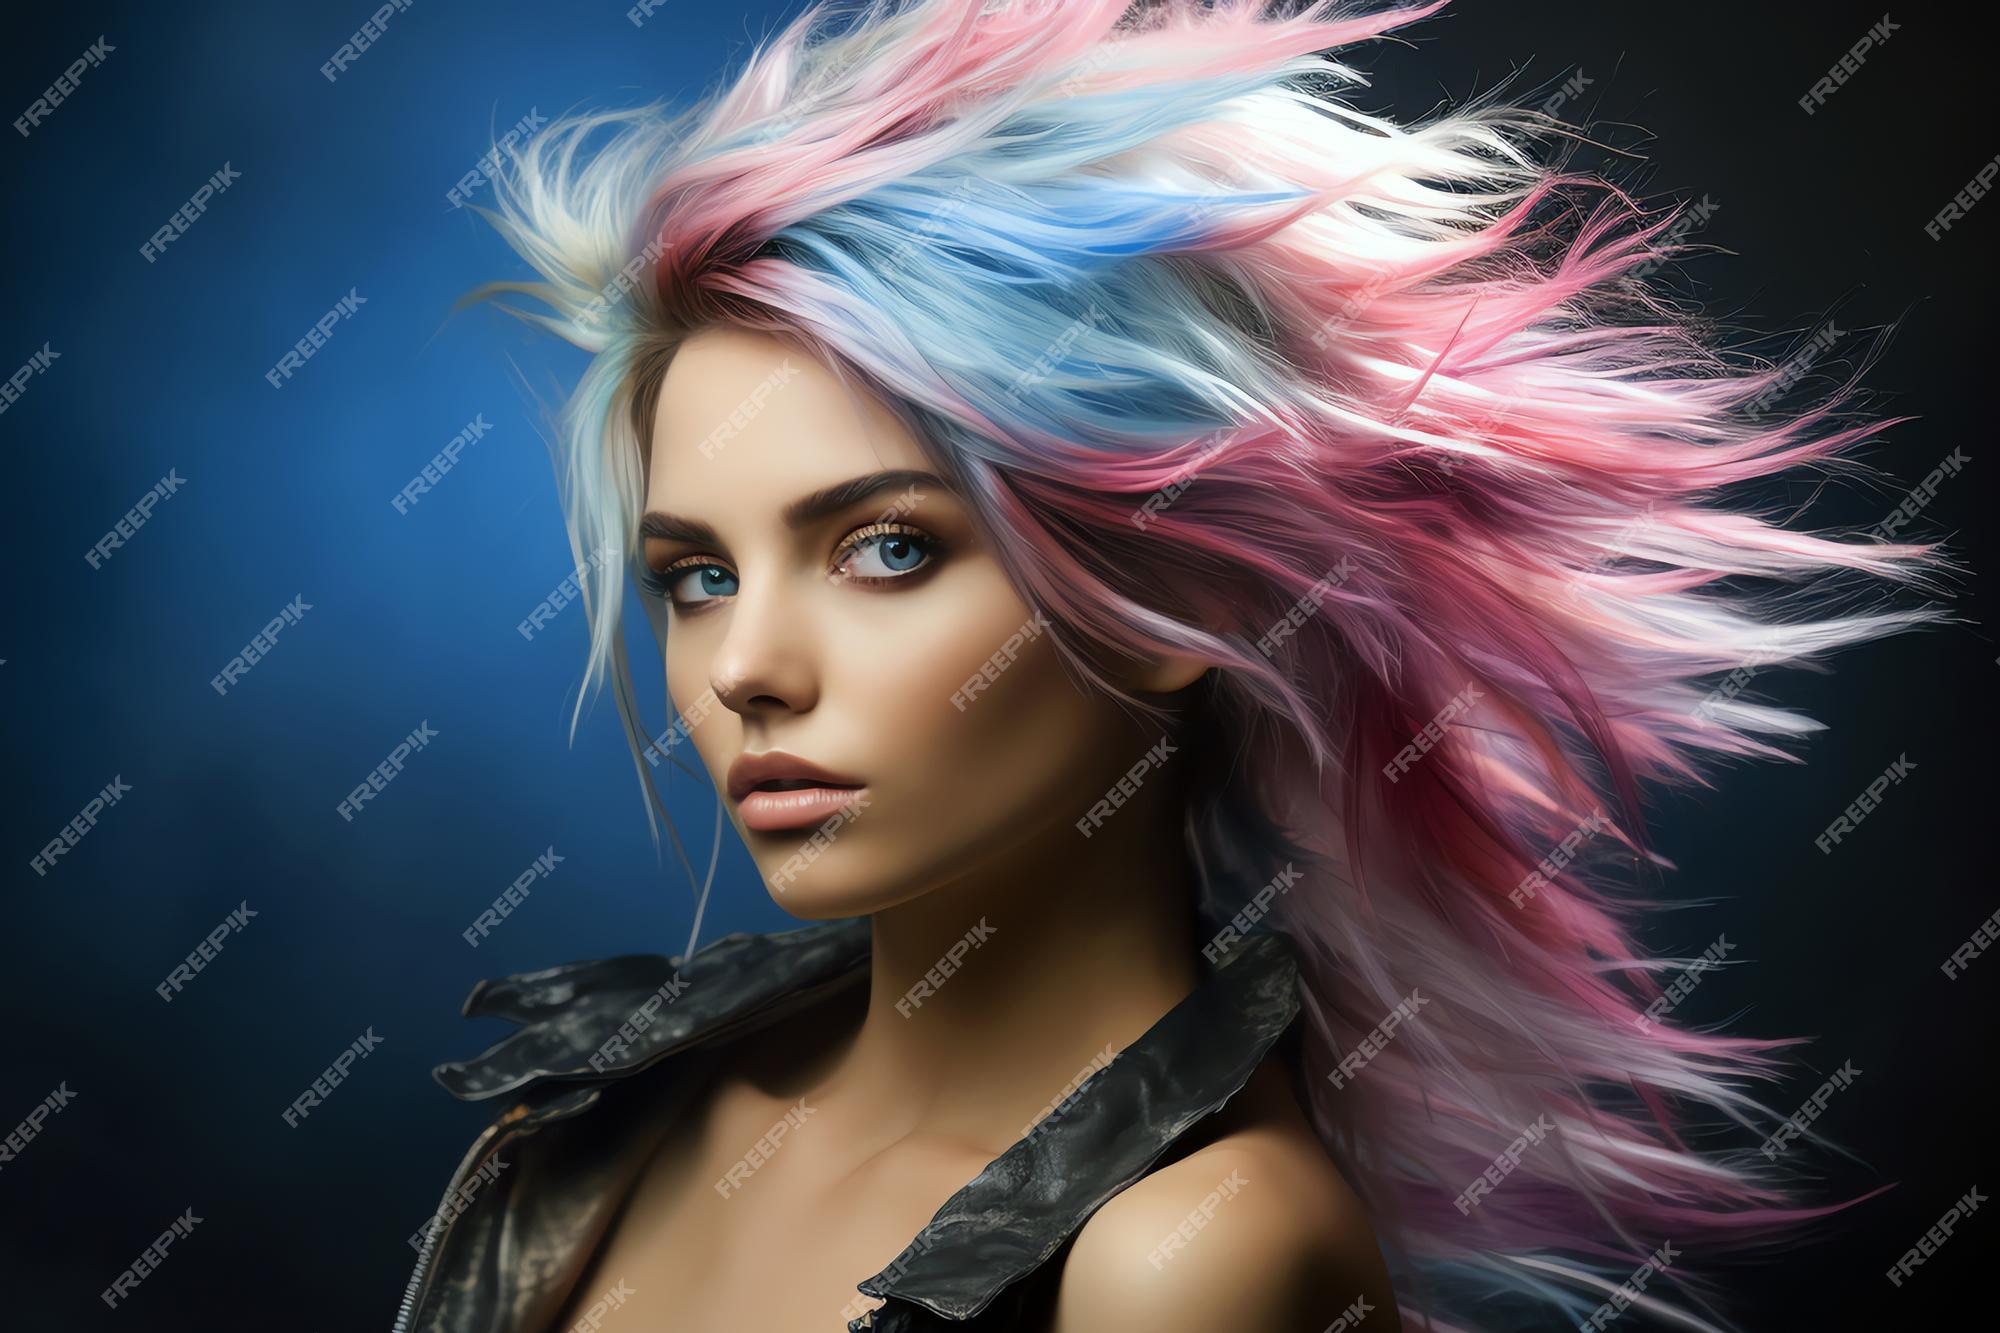 4. Celebrities Rocking Pink and Blue Hair Curls - wide 9